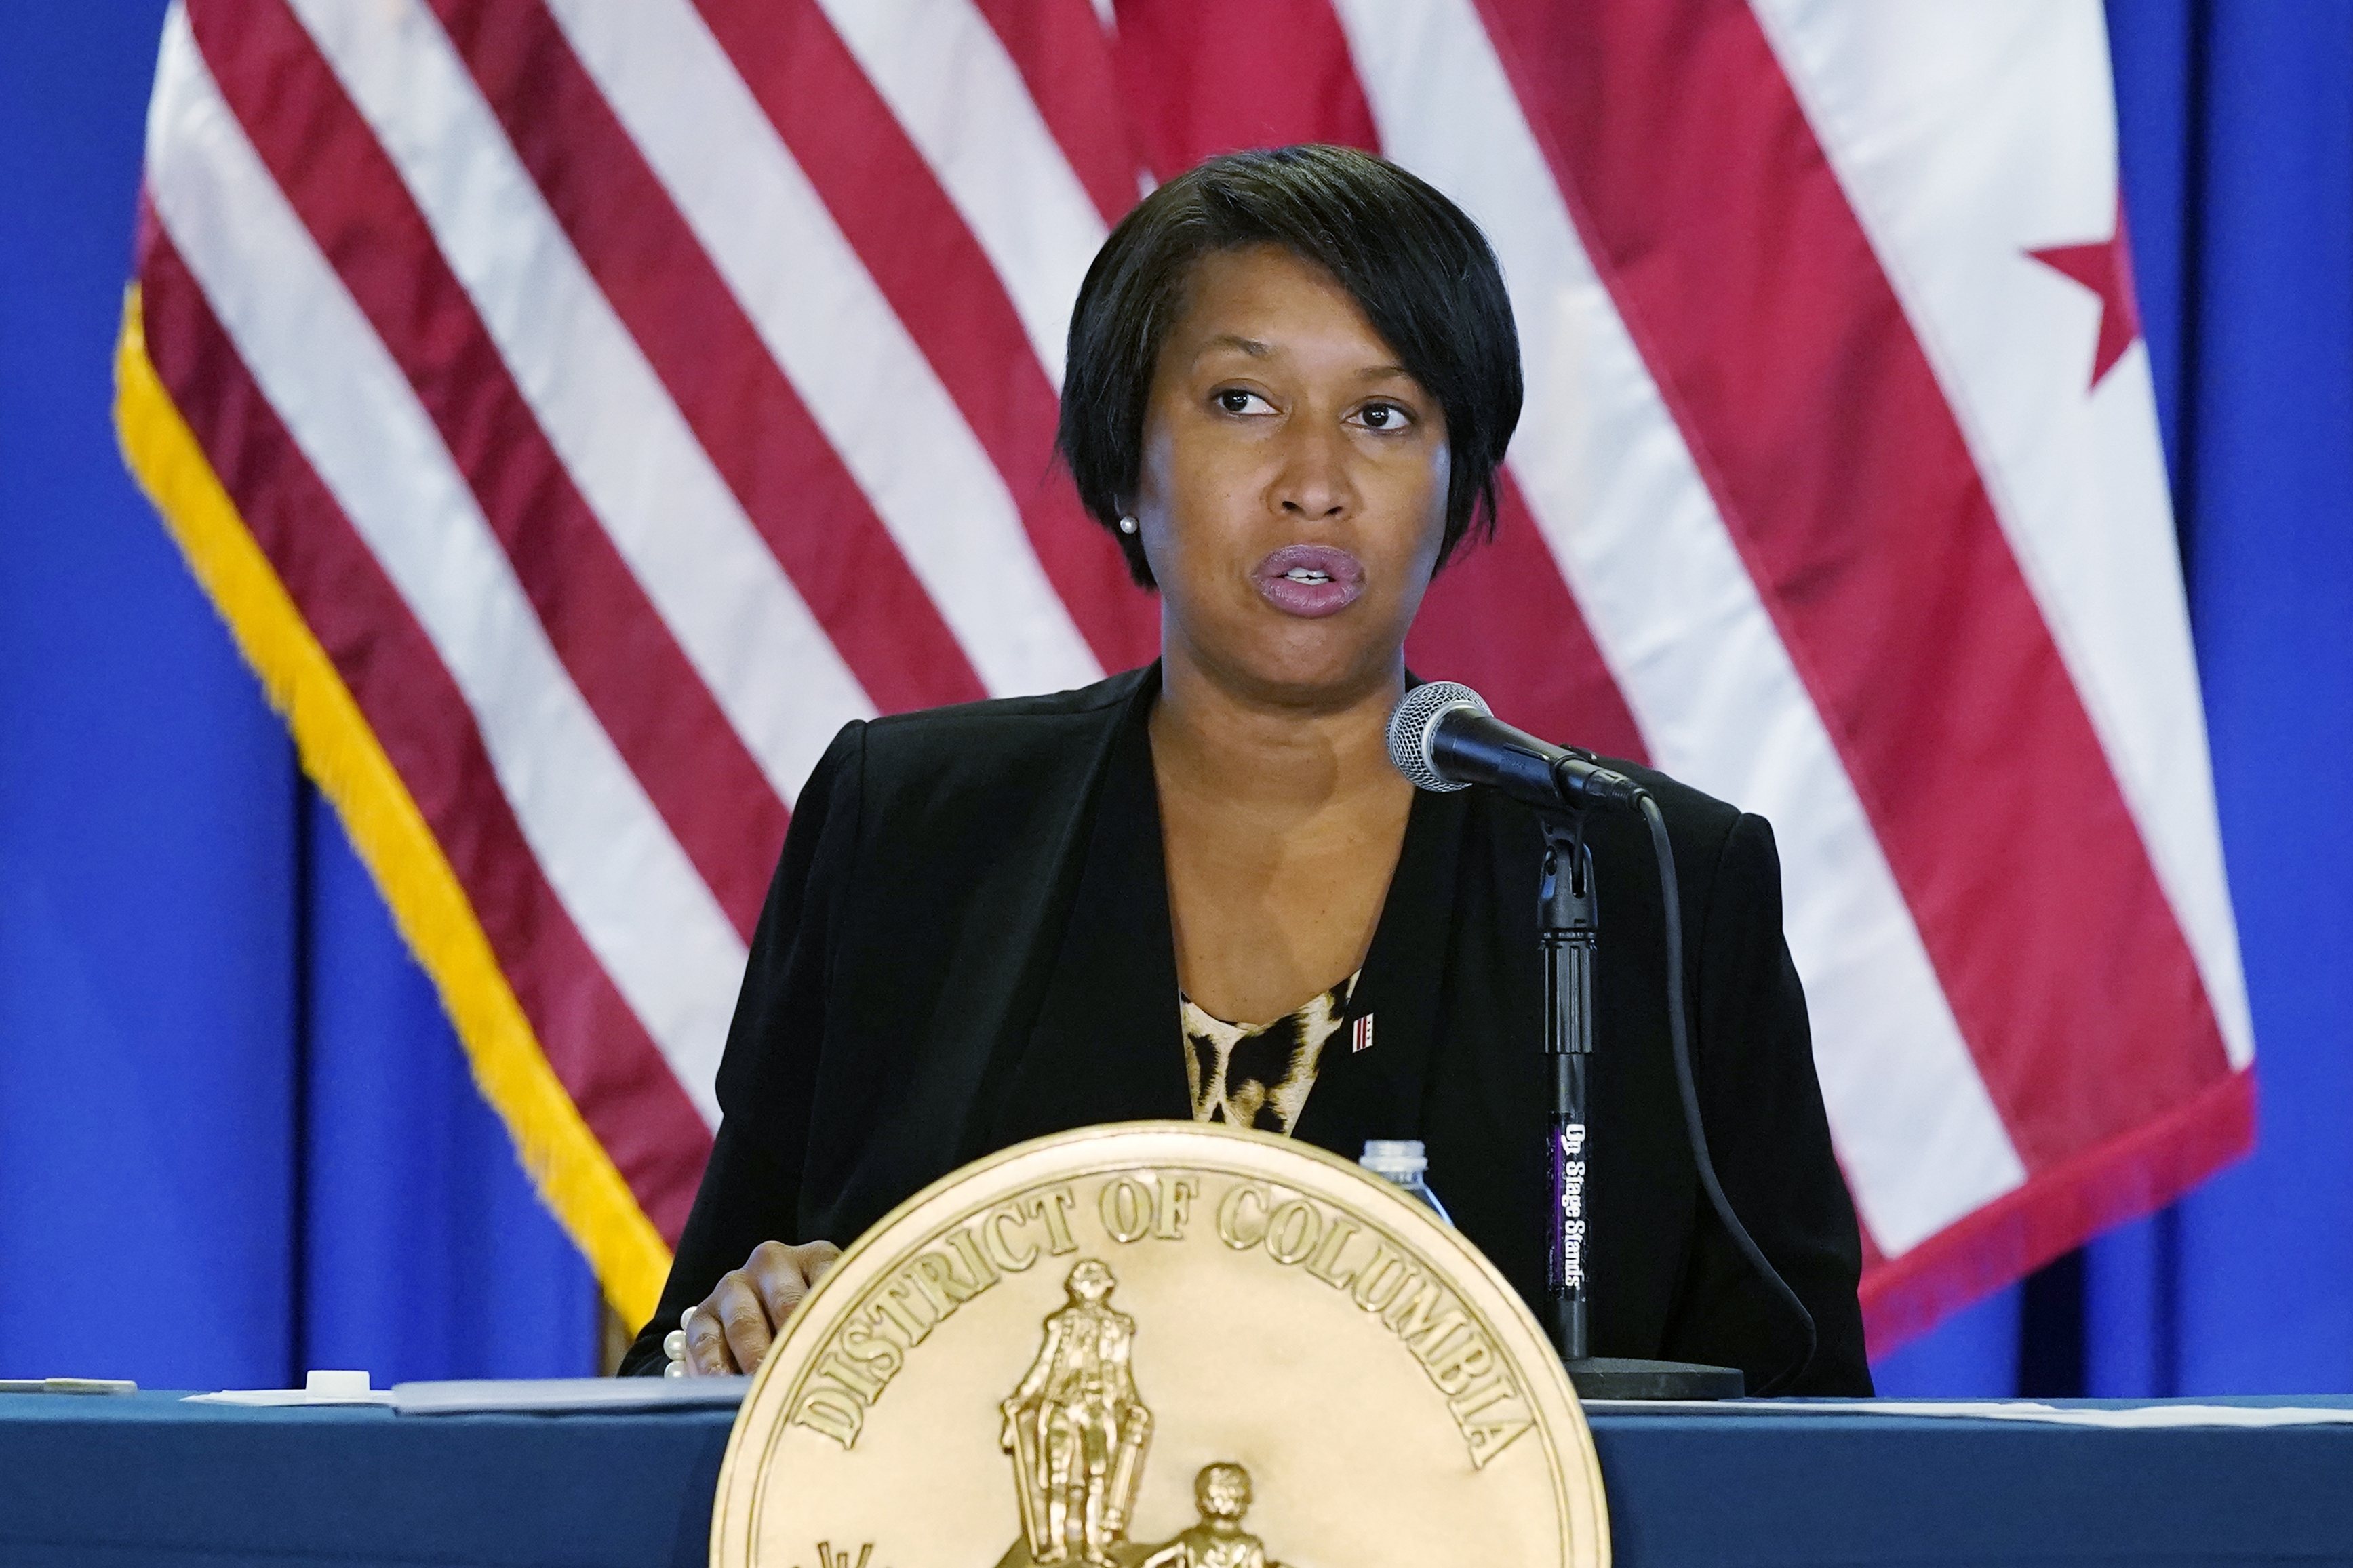 Muriel Bowser comments that Capital One Arena could open for